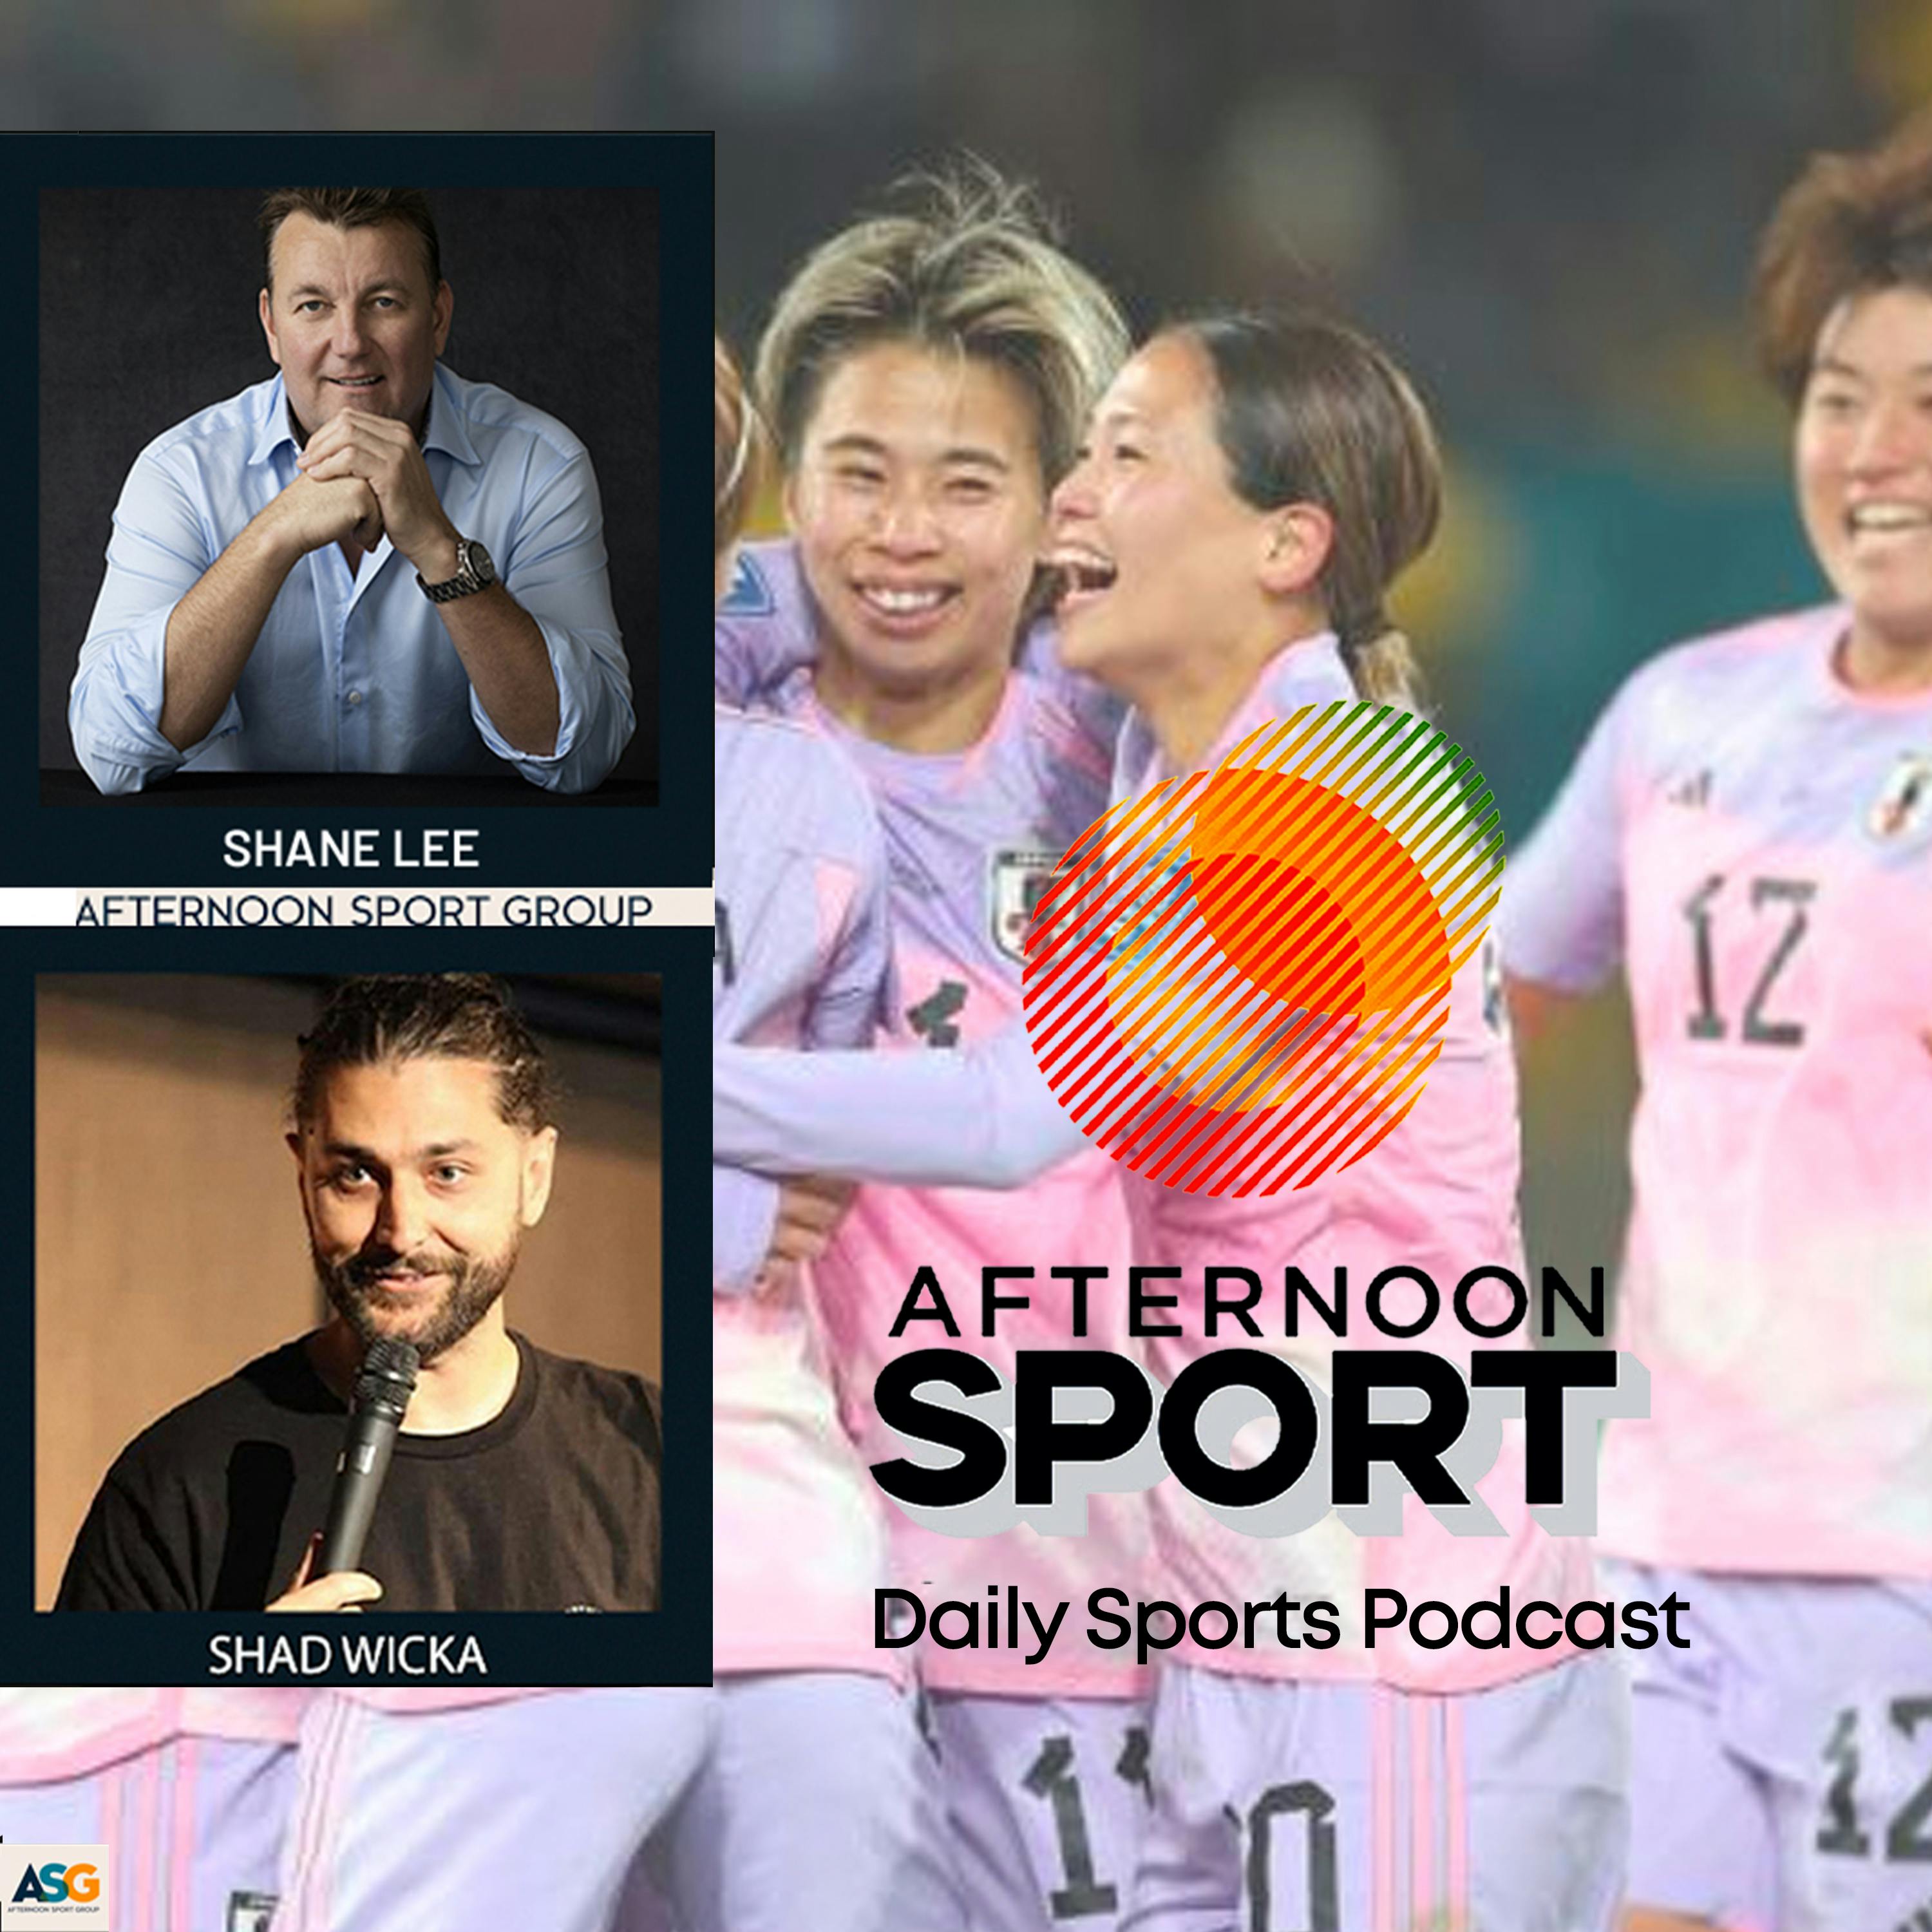 11th August Shane Lee & Shad Wicka: Women’s World Cup, Harry Kane offer from Bayern Munich, Surfer Ethan Ewing breaks back, Wallabies rebuild, AFL, NRL + more!